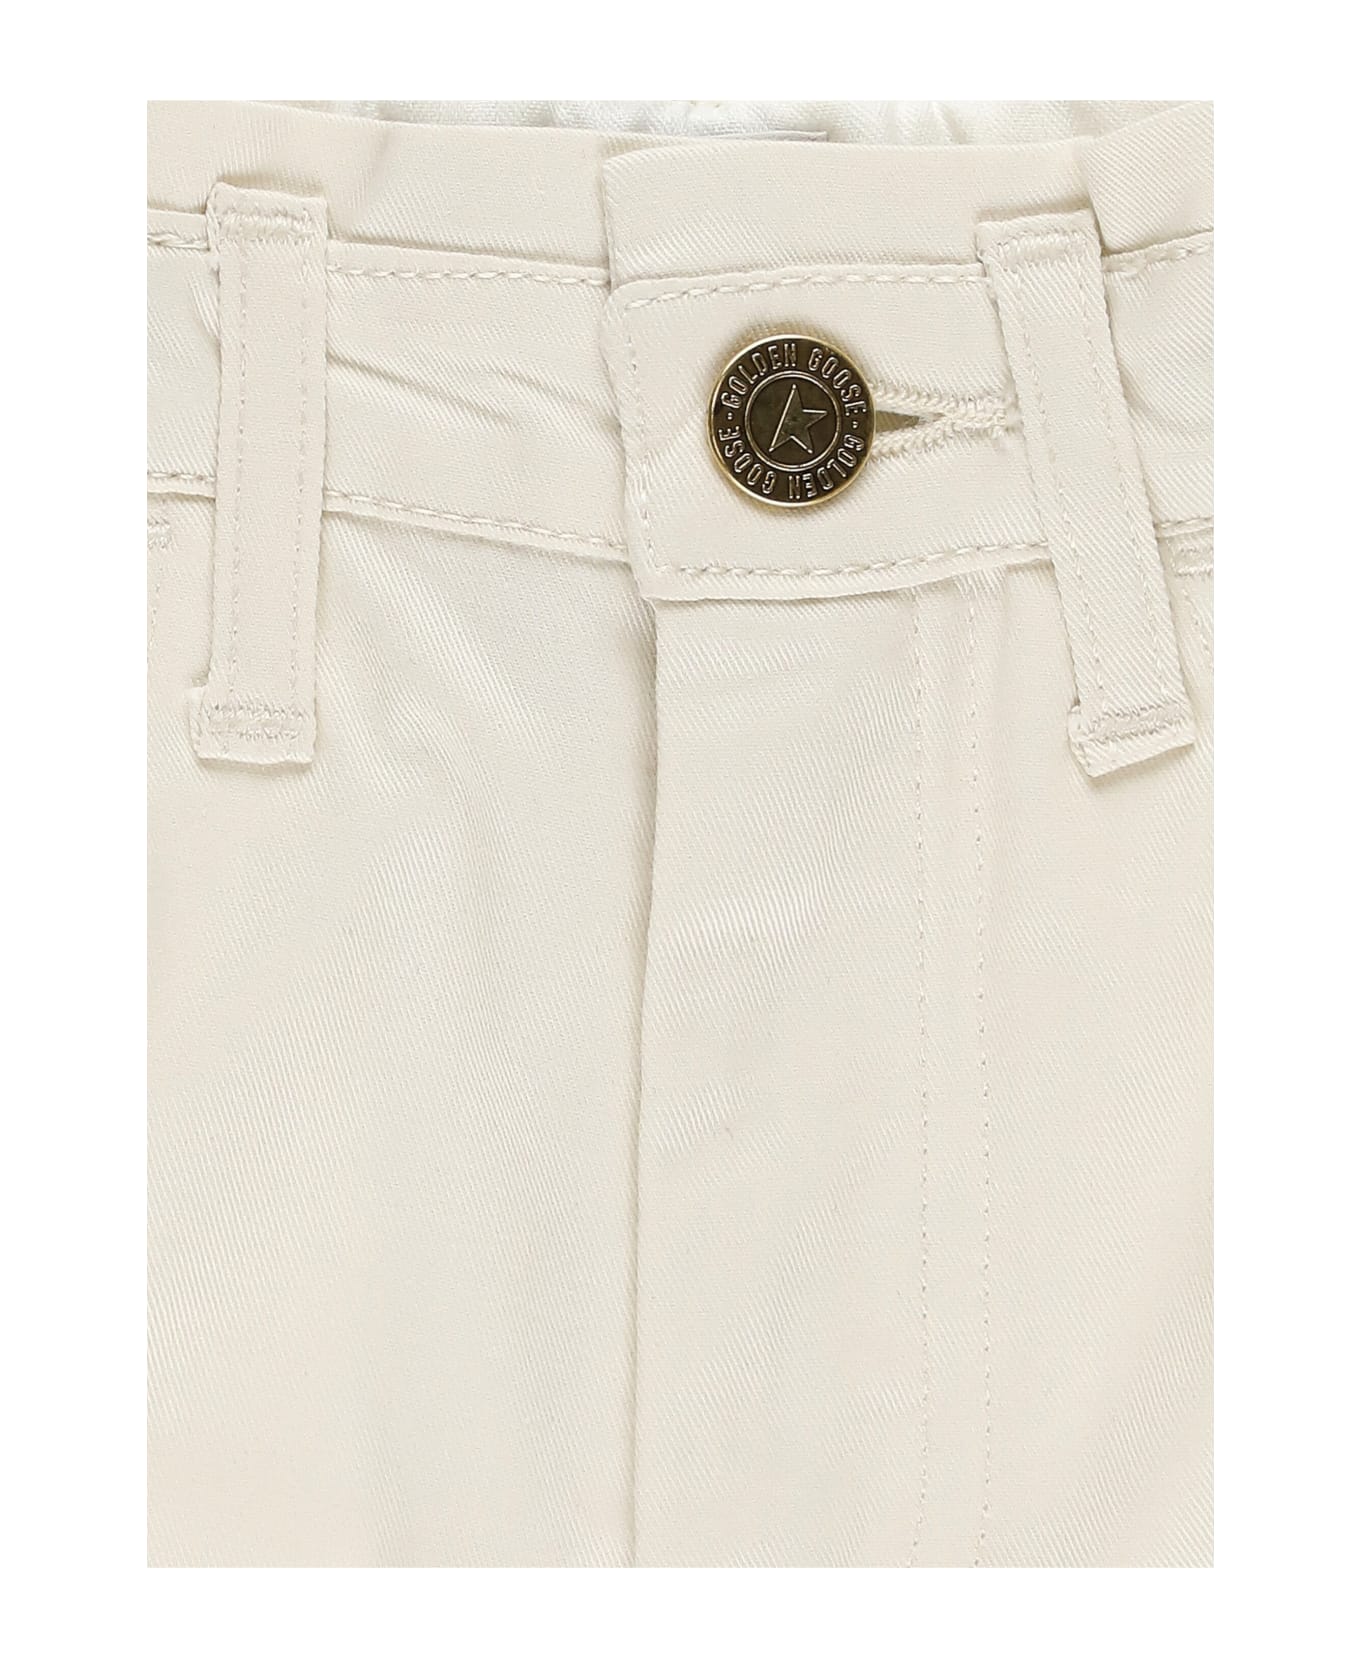 Golden Goose Cotton Jeans - Ivory ボトムス